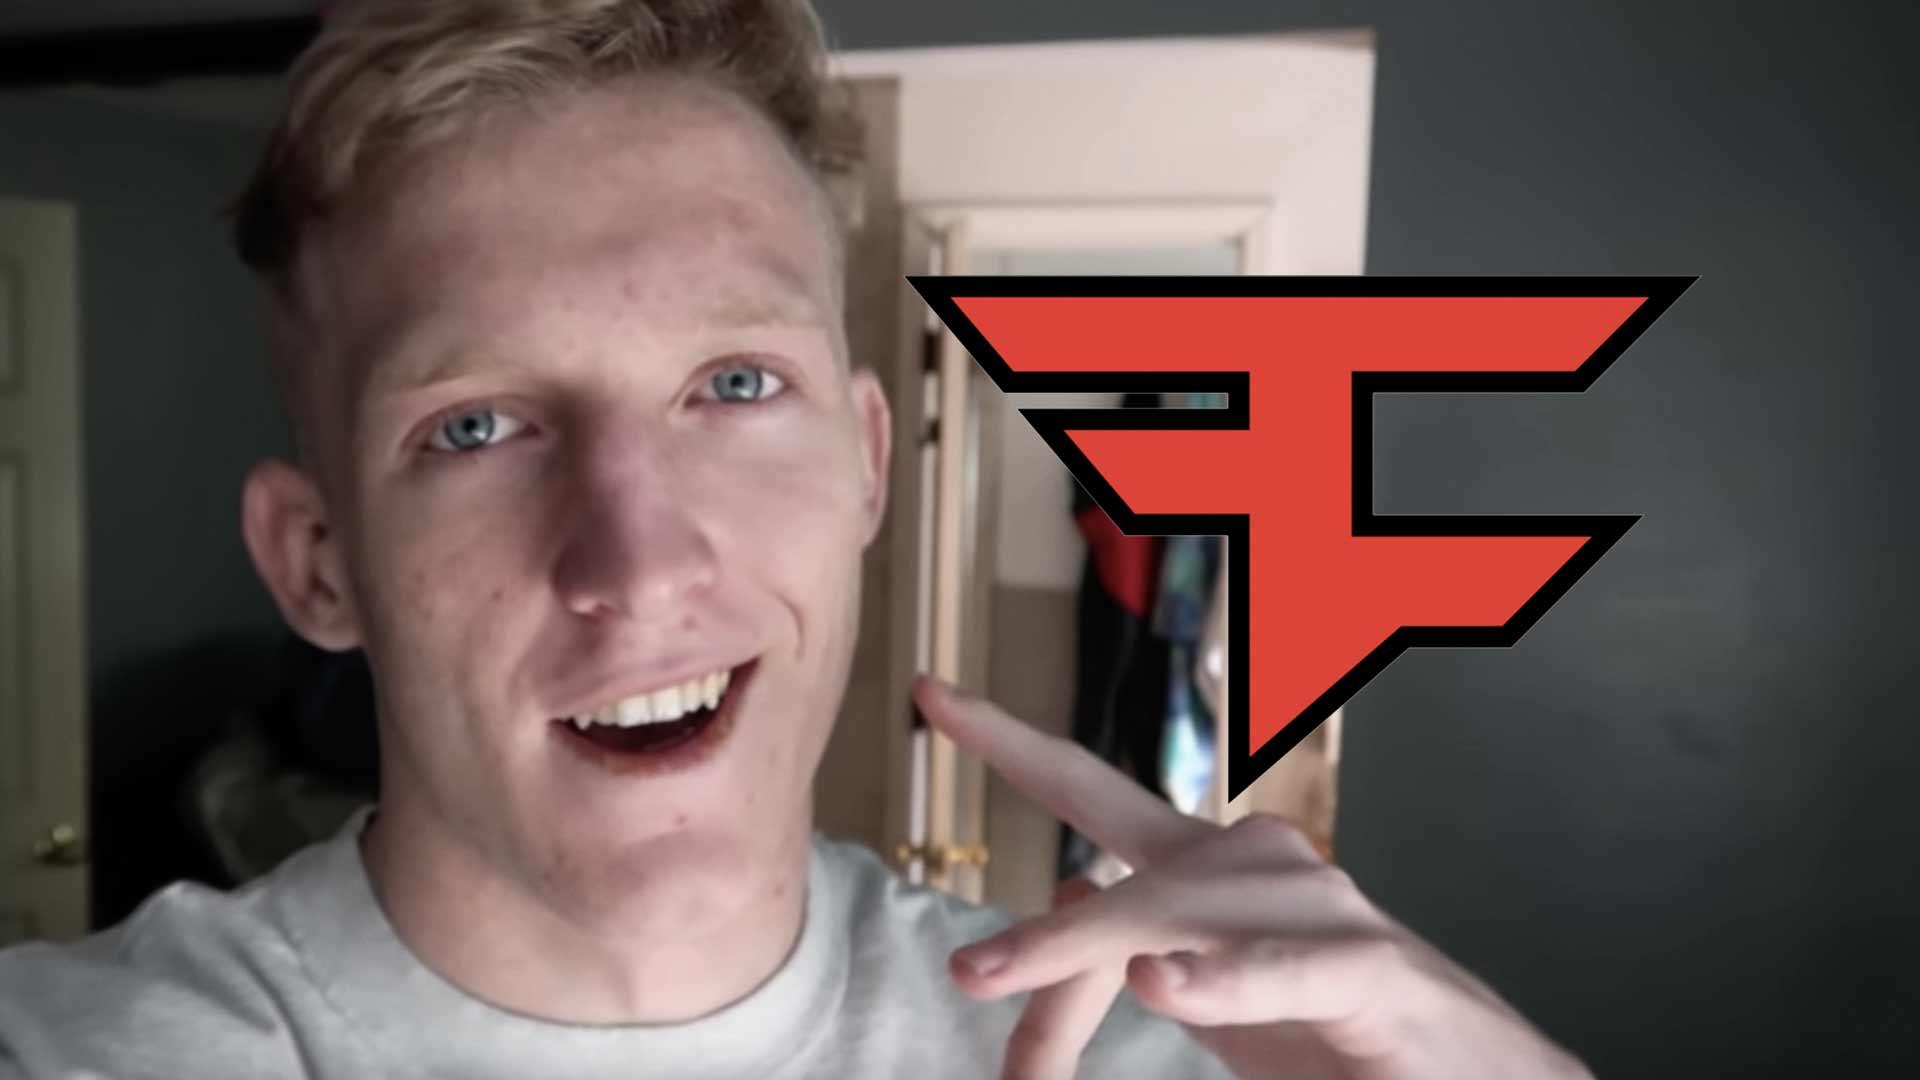 Esports Gamer Tfue Claims FaZe Clan Forces Alcohol On Minors in Lawsuit Over Contract